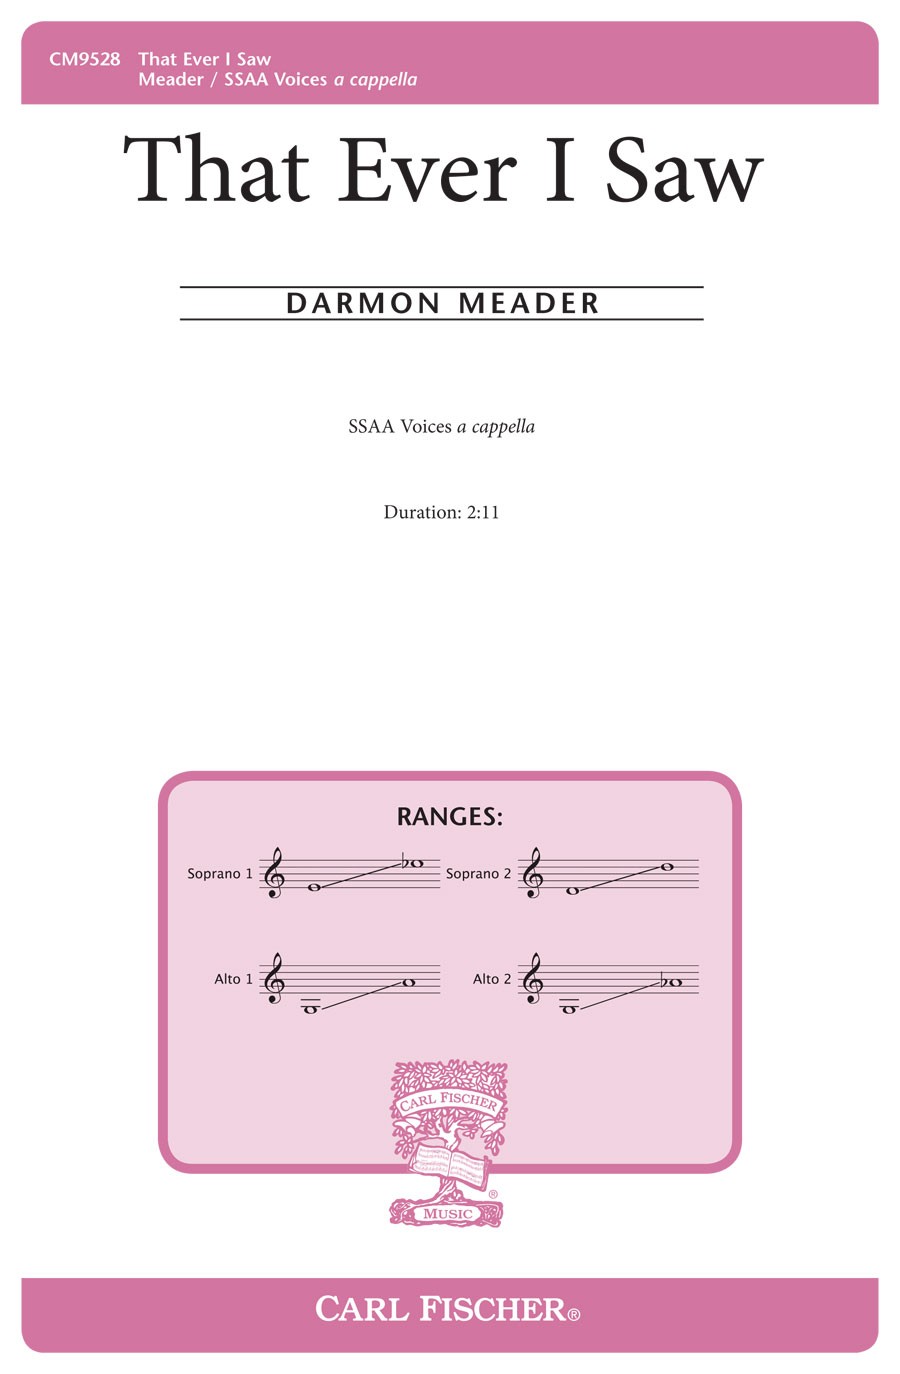 That Ever I Saw : SSAA : Darmon Meader : Sheet Music : CM9528